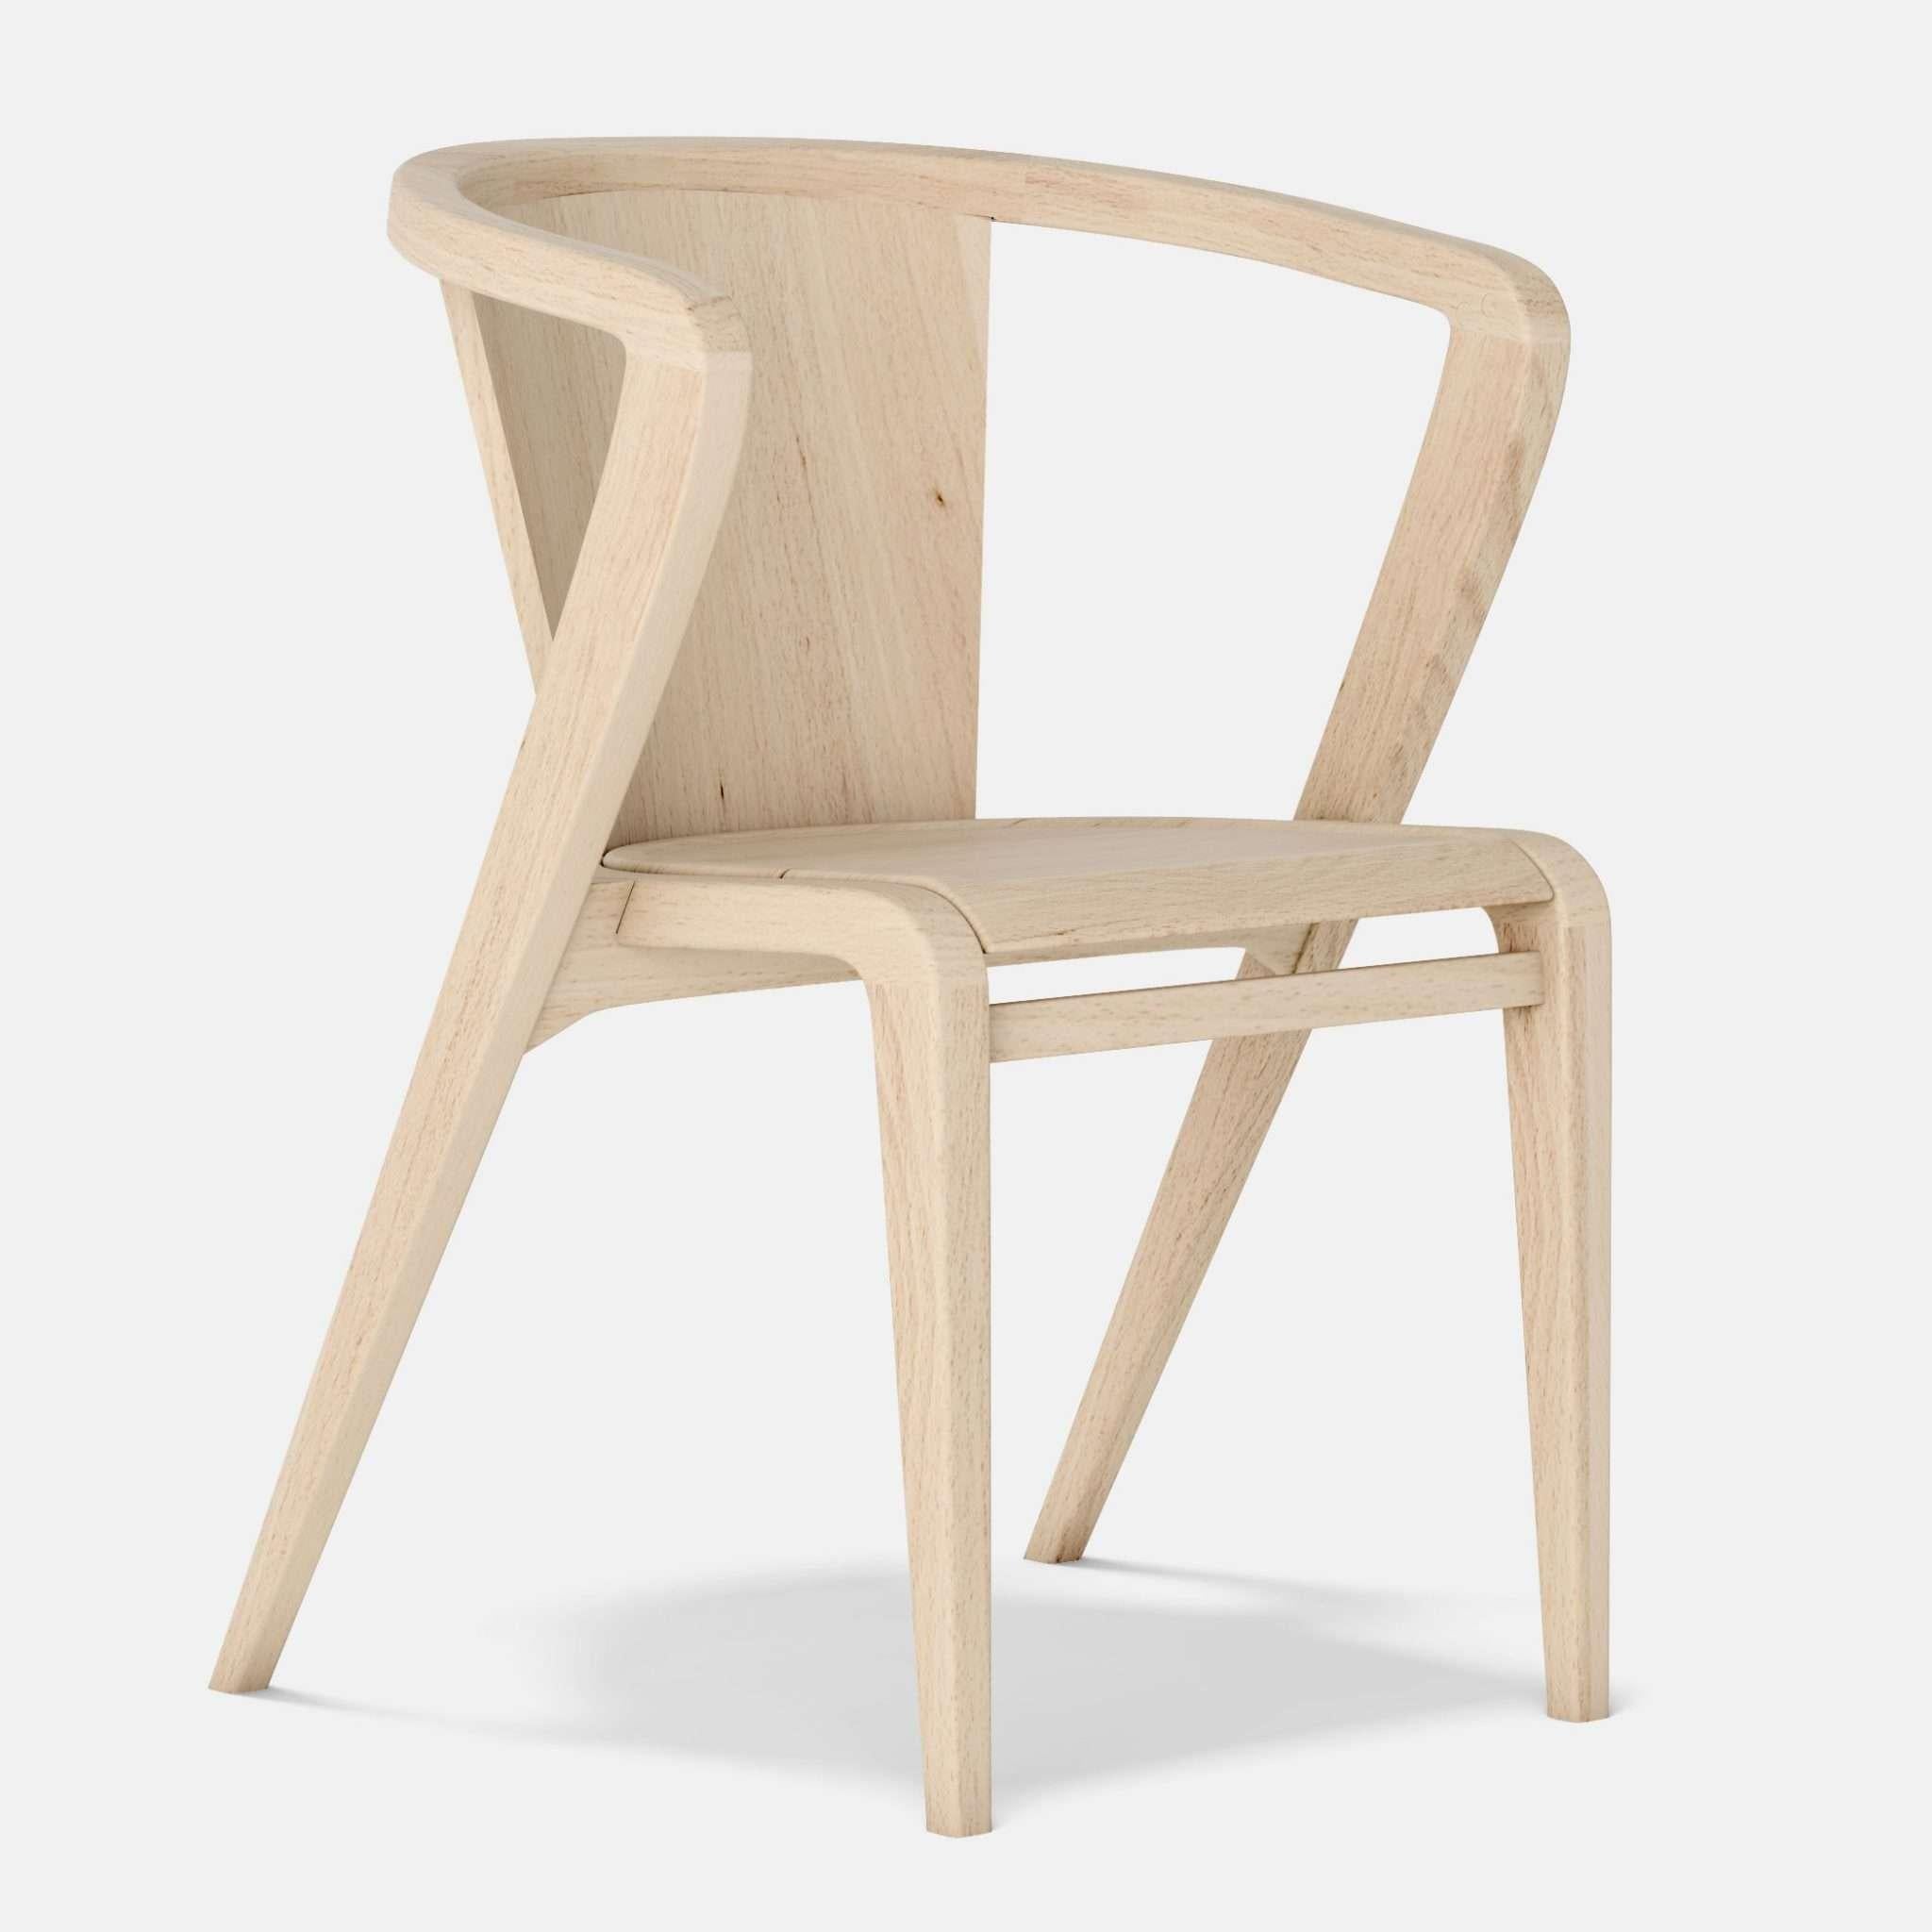 Ash Portuguese roots chair by Alexandre Caldas
Dimensions: W 40 x D 39 x H 73 cm
Materials: Ash

PORTUGUESE ROOTS Chair, was inspired by its original model from 1950, created by Gonçalo Rodrigues dos Santos and designed today by Alexandre